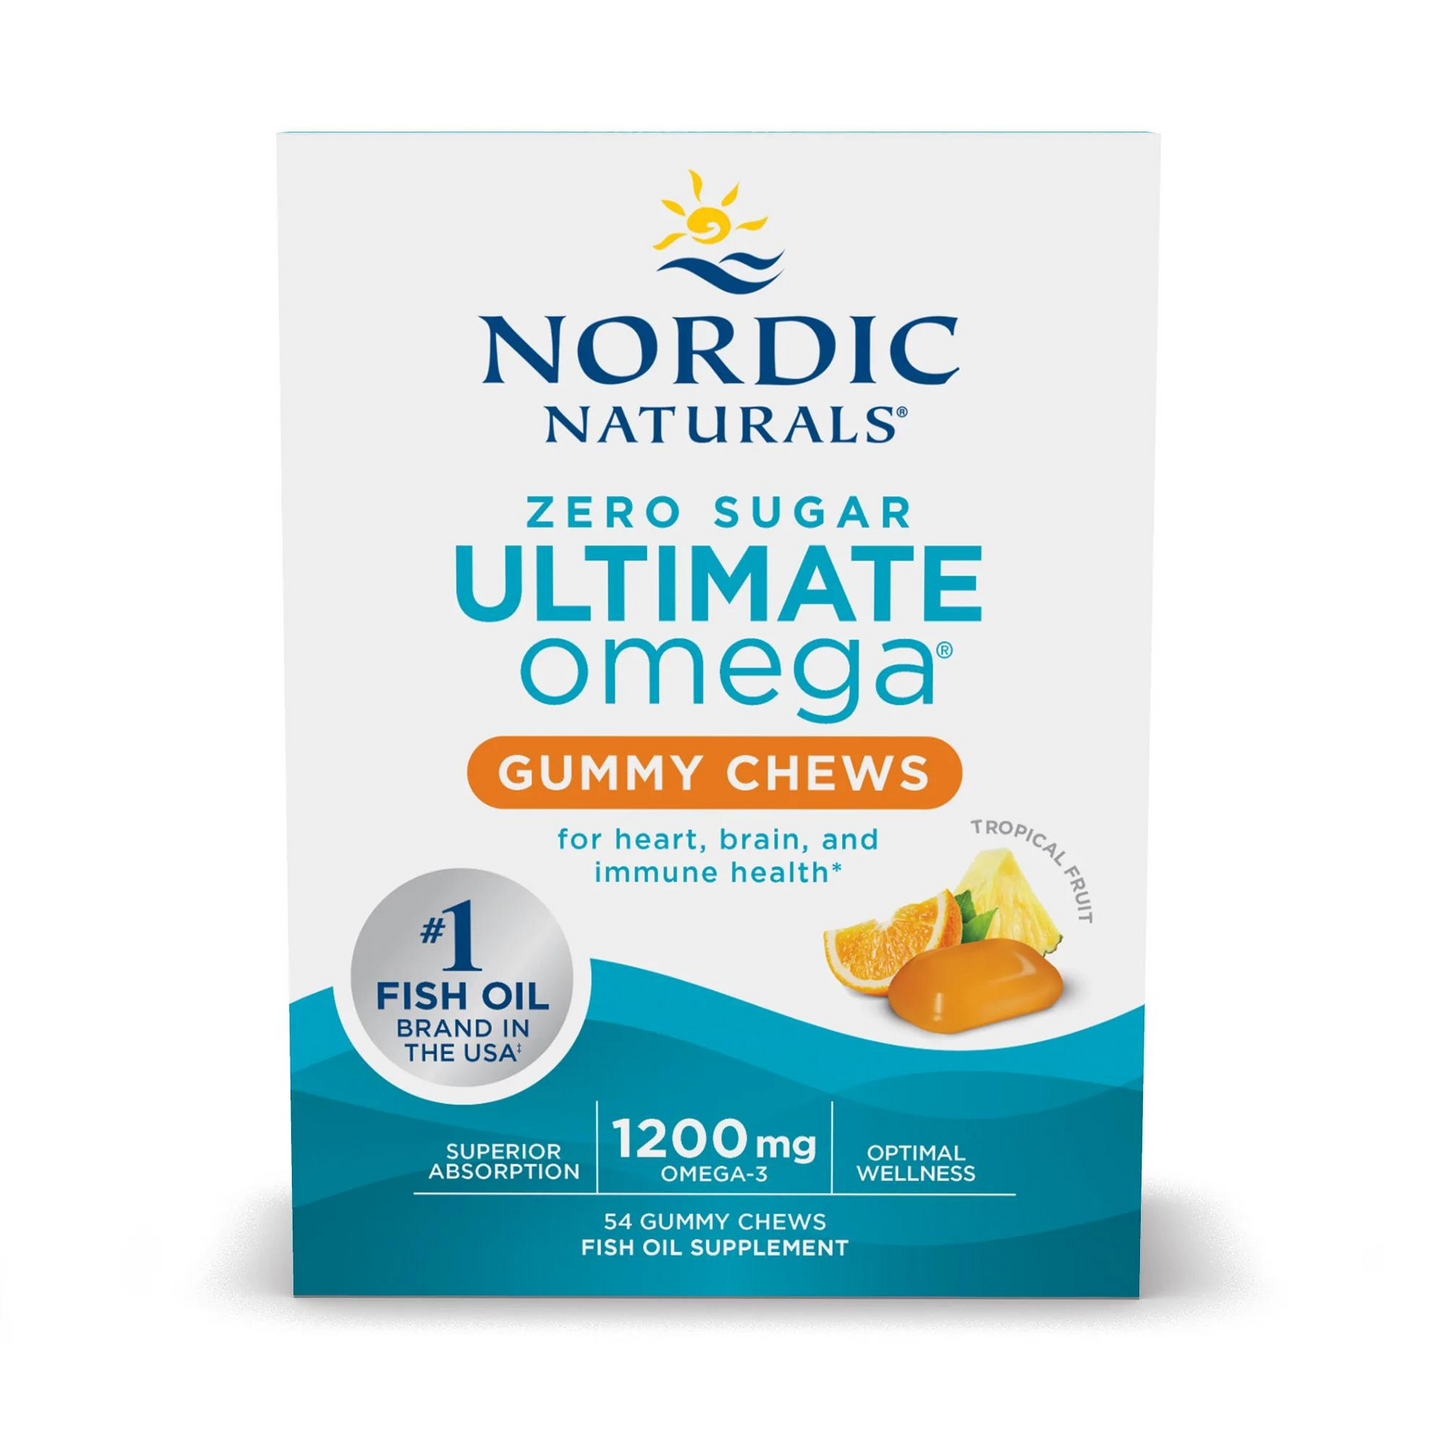 Primary Image of Nordic Naturals Ultimate Omega Gummy Chews (54 count) 